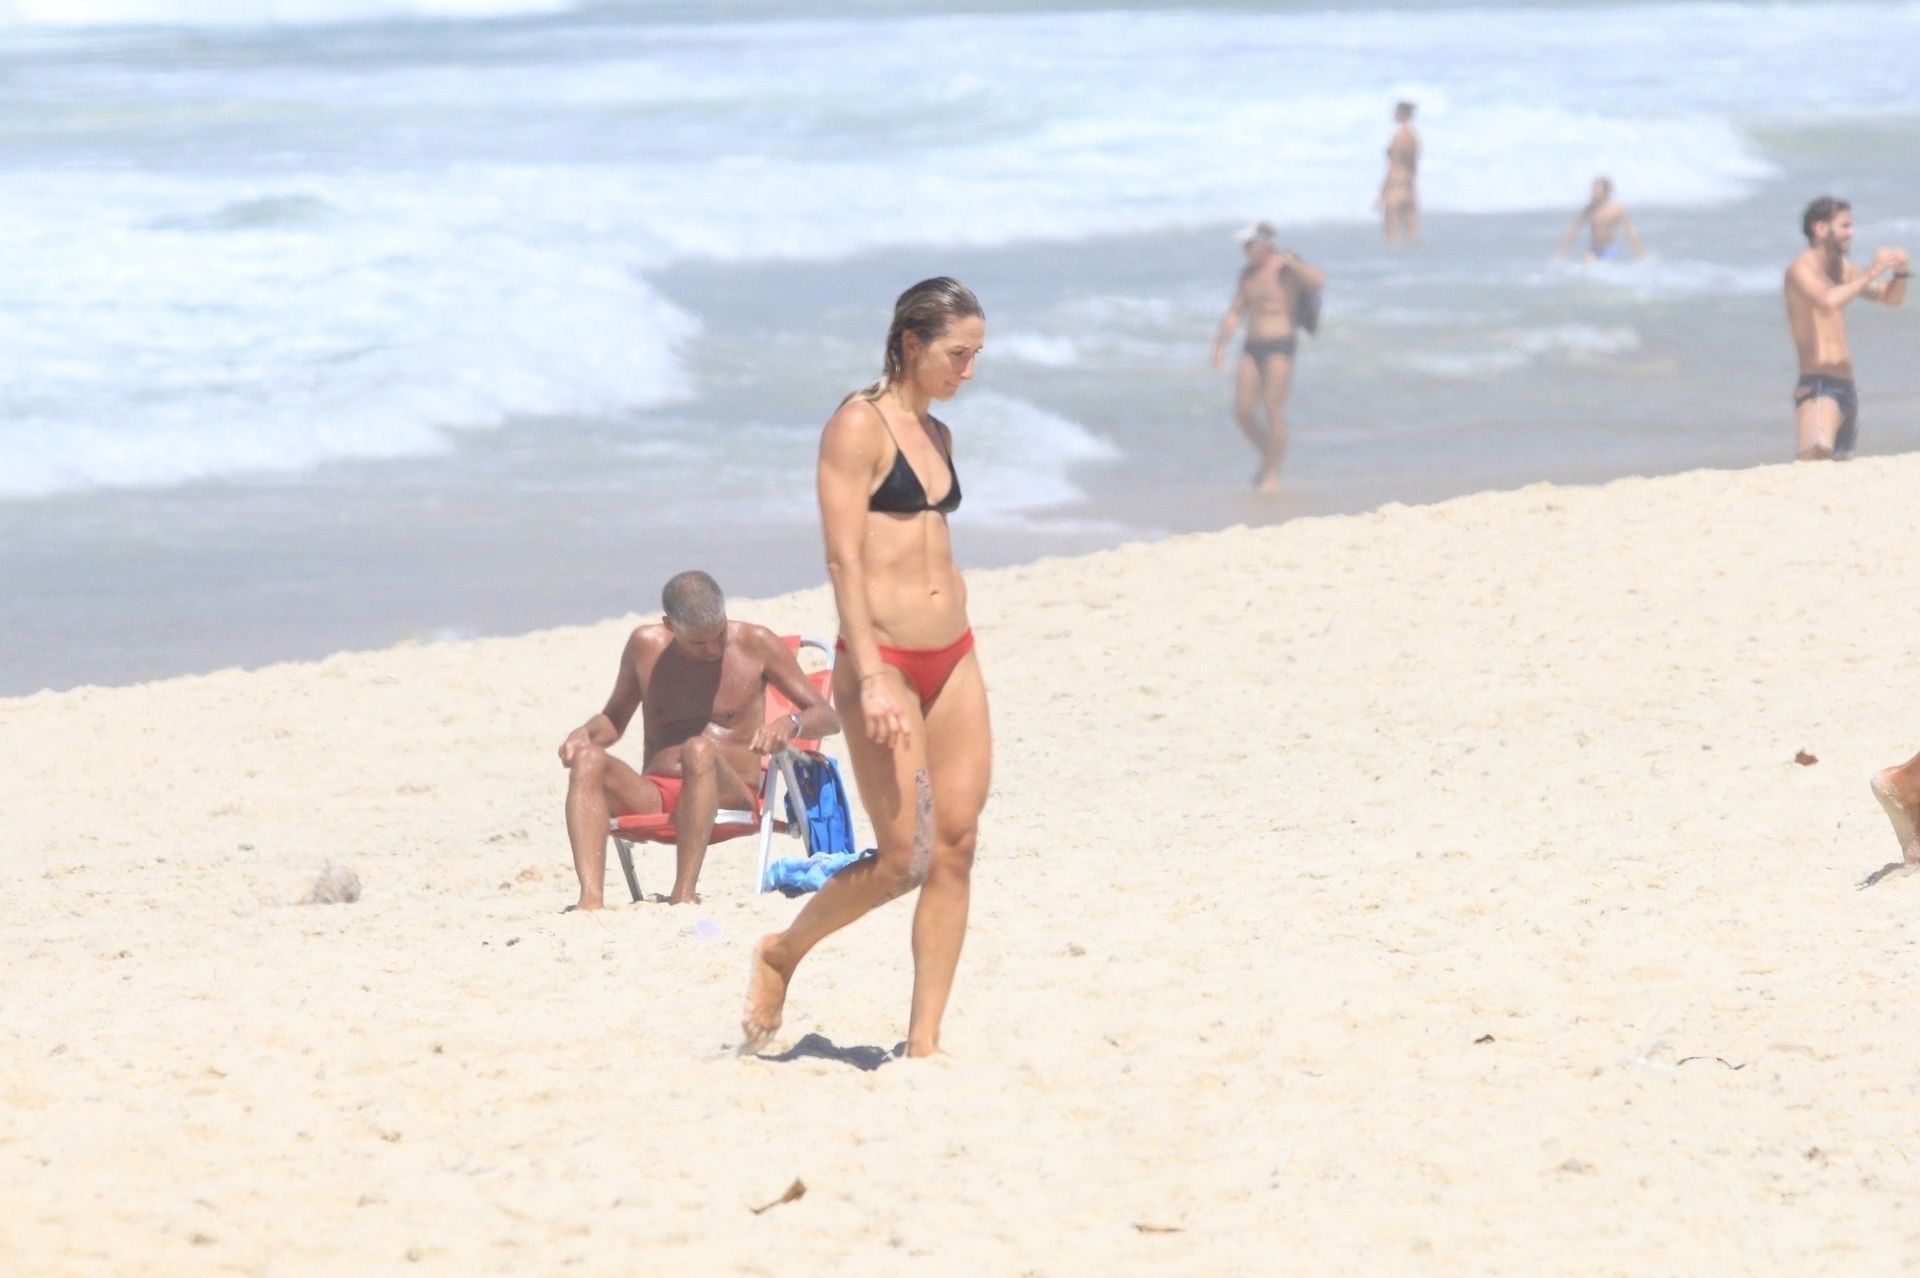 Brandie Wilkerson & Heather Bansley Are Seen on the Beach in Rio (108 Photos)